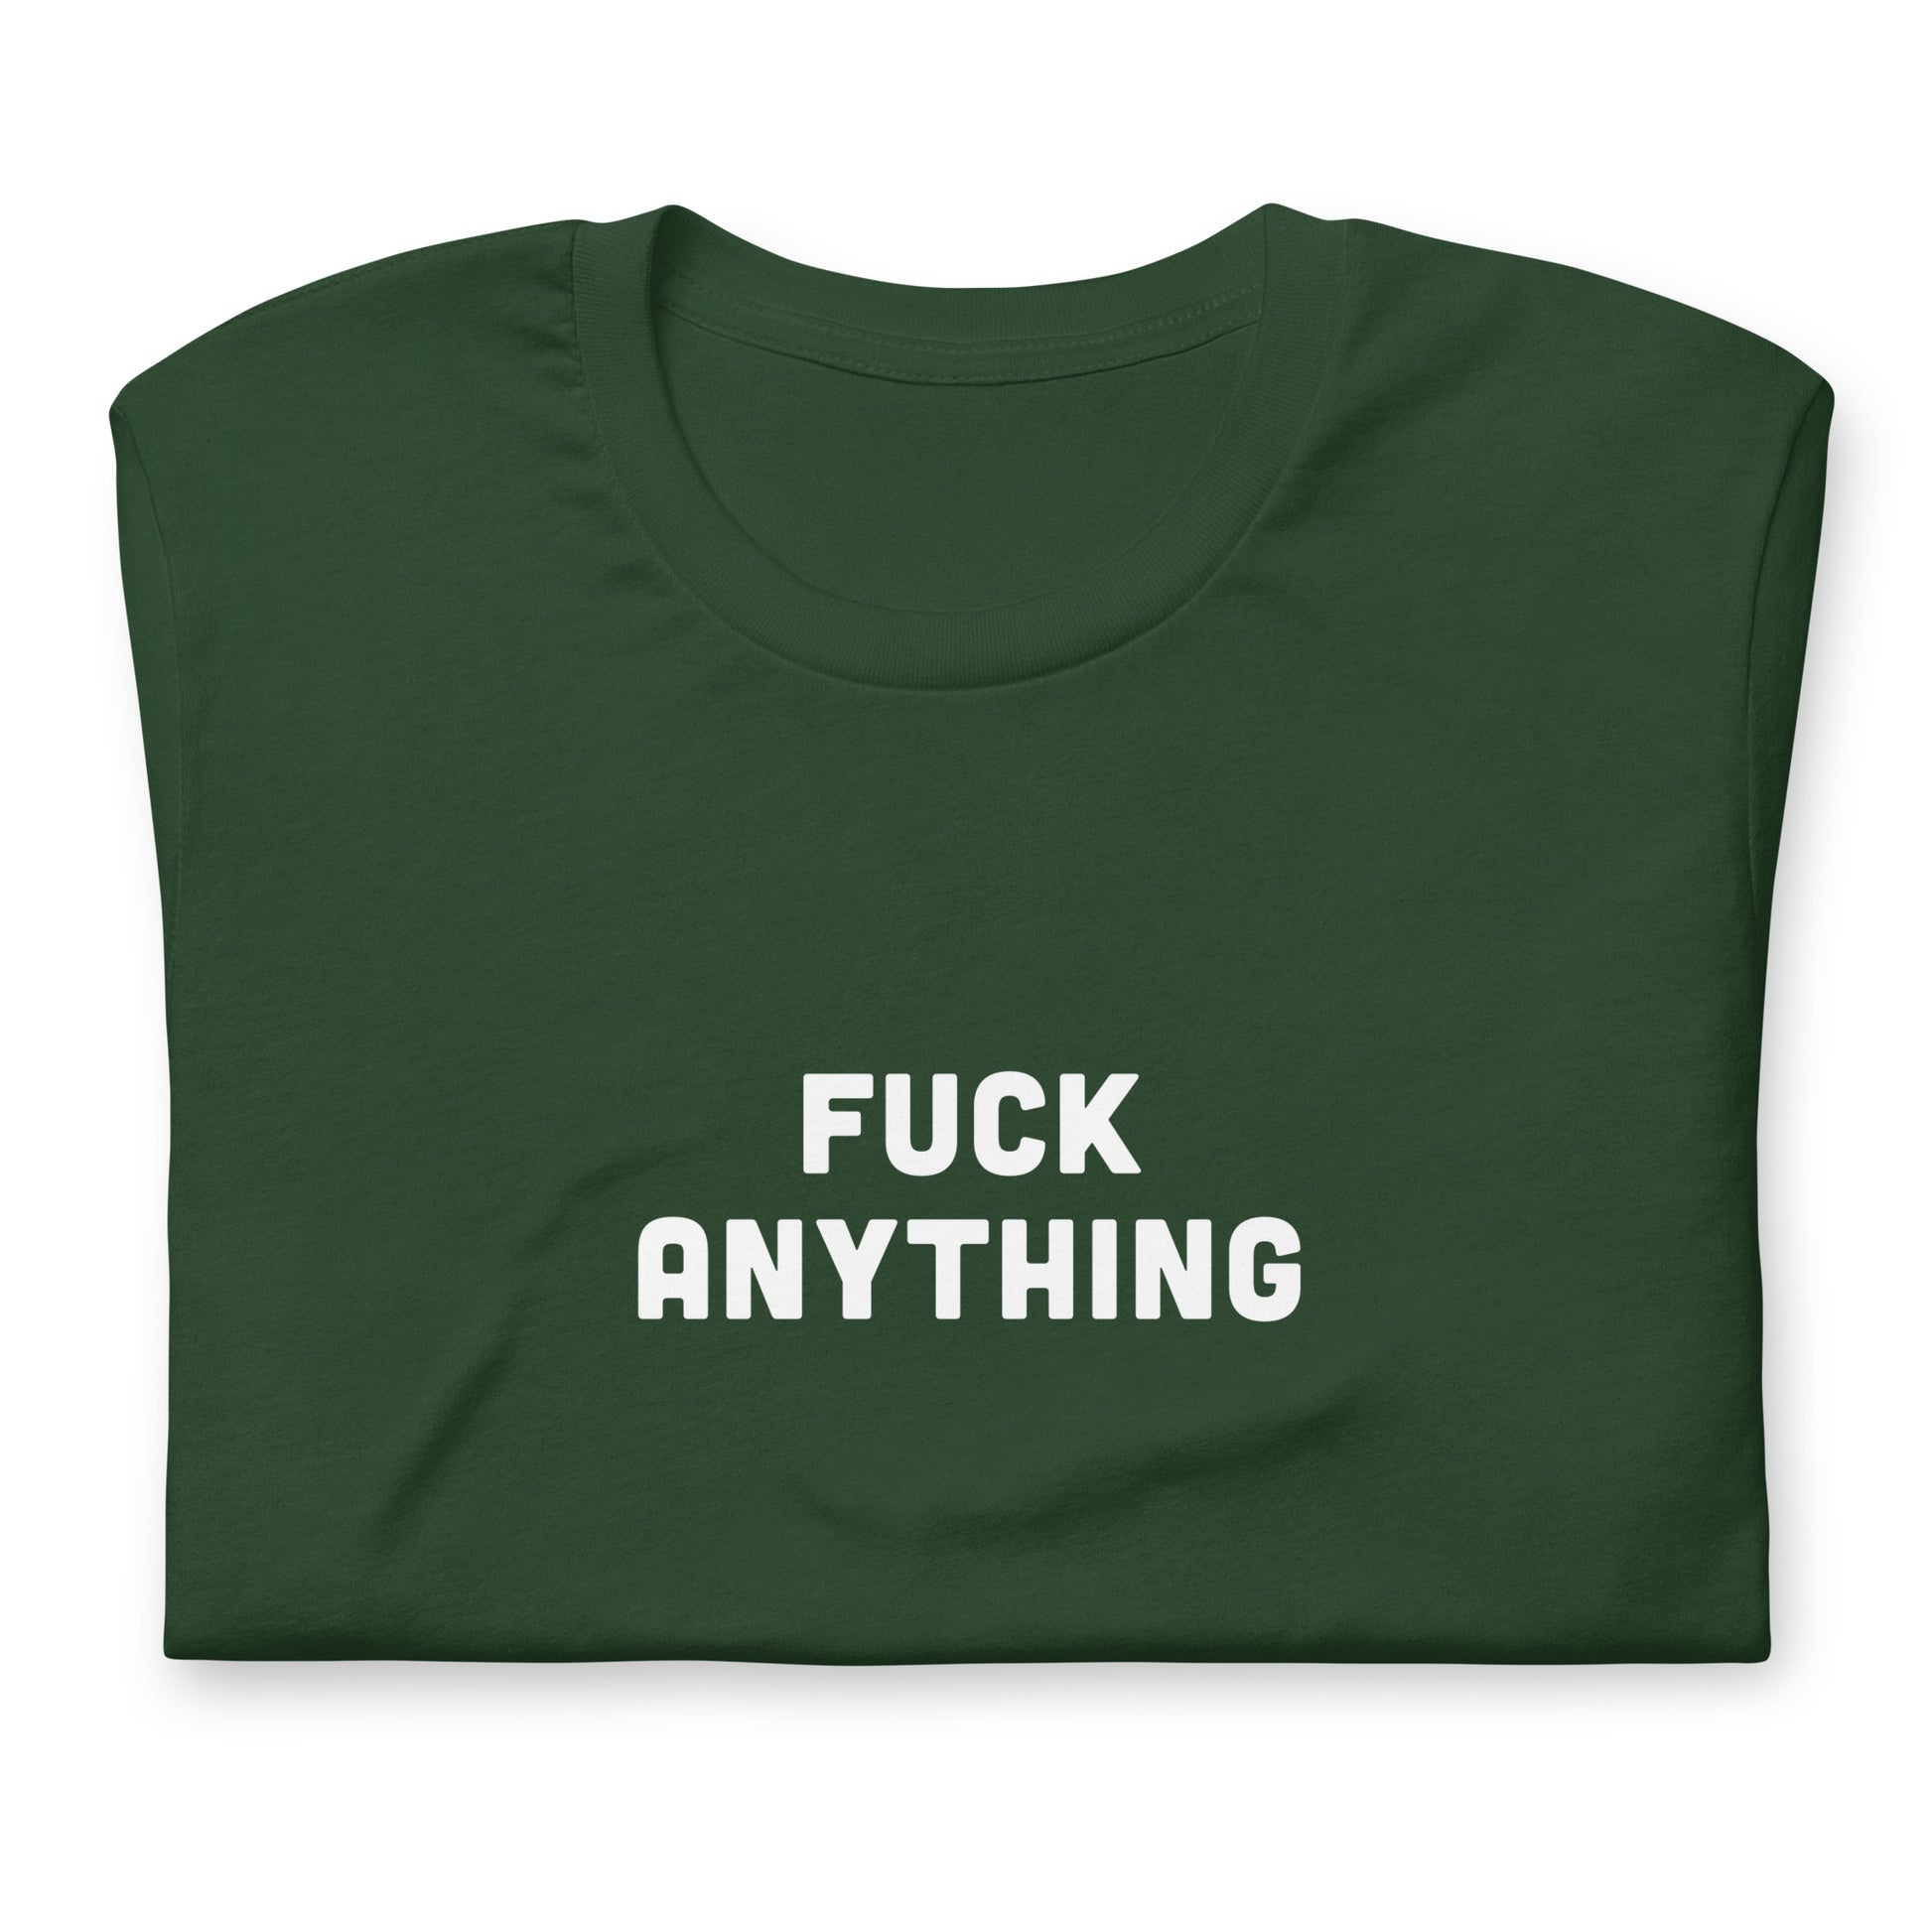 Fuck Anything T-Shirt Size XL Color Black